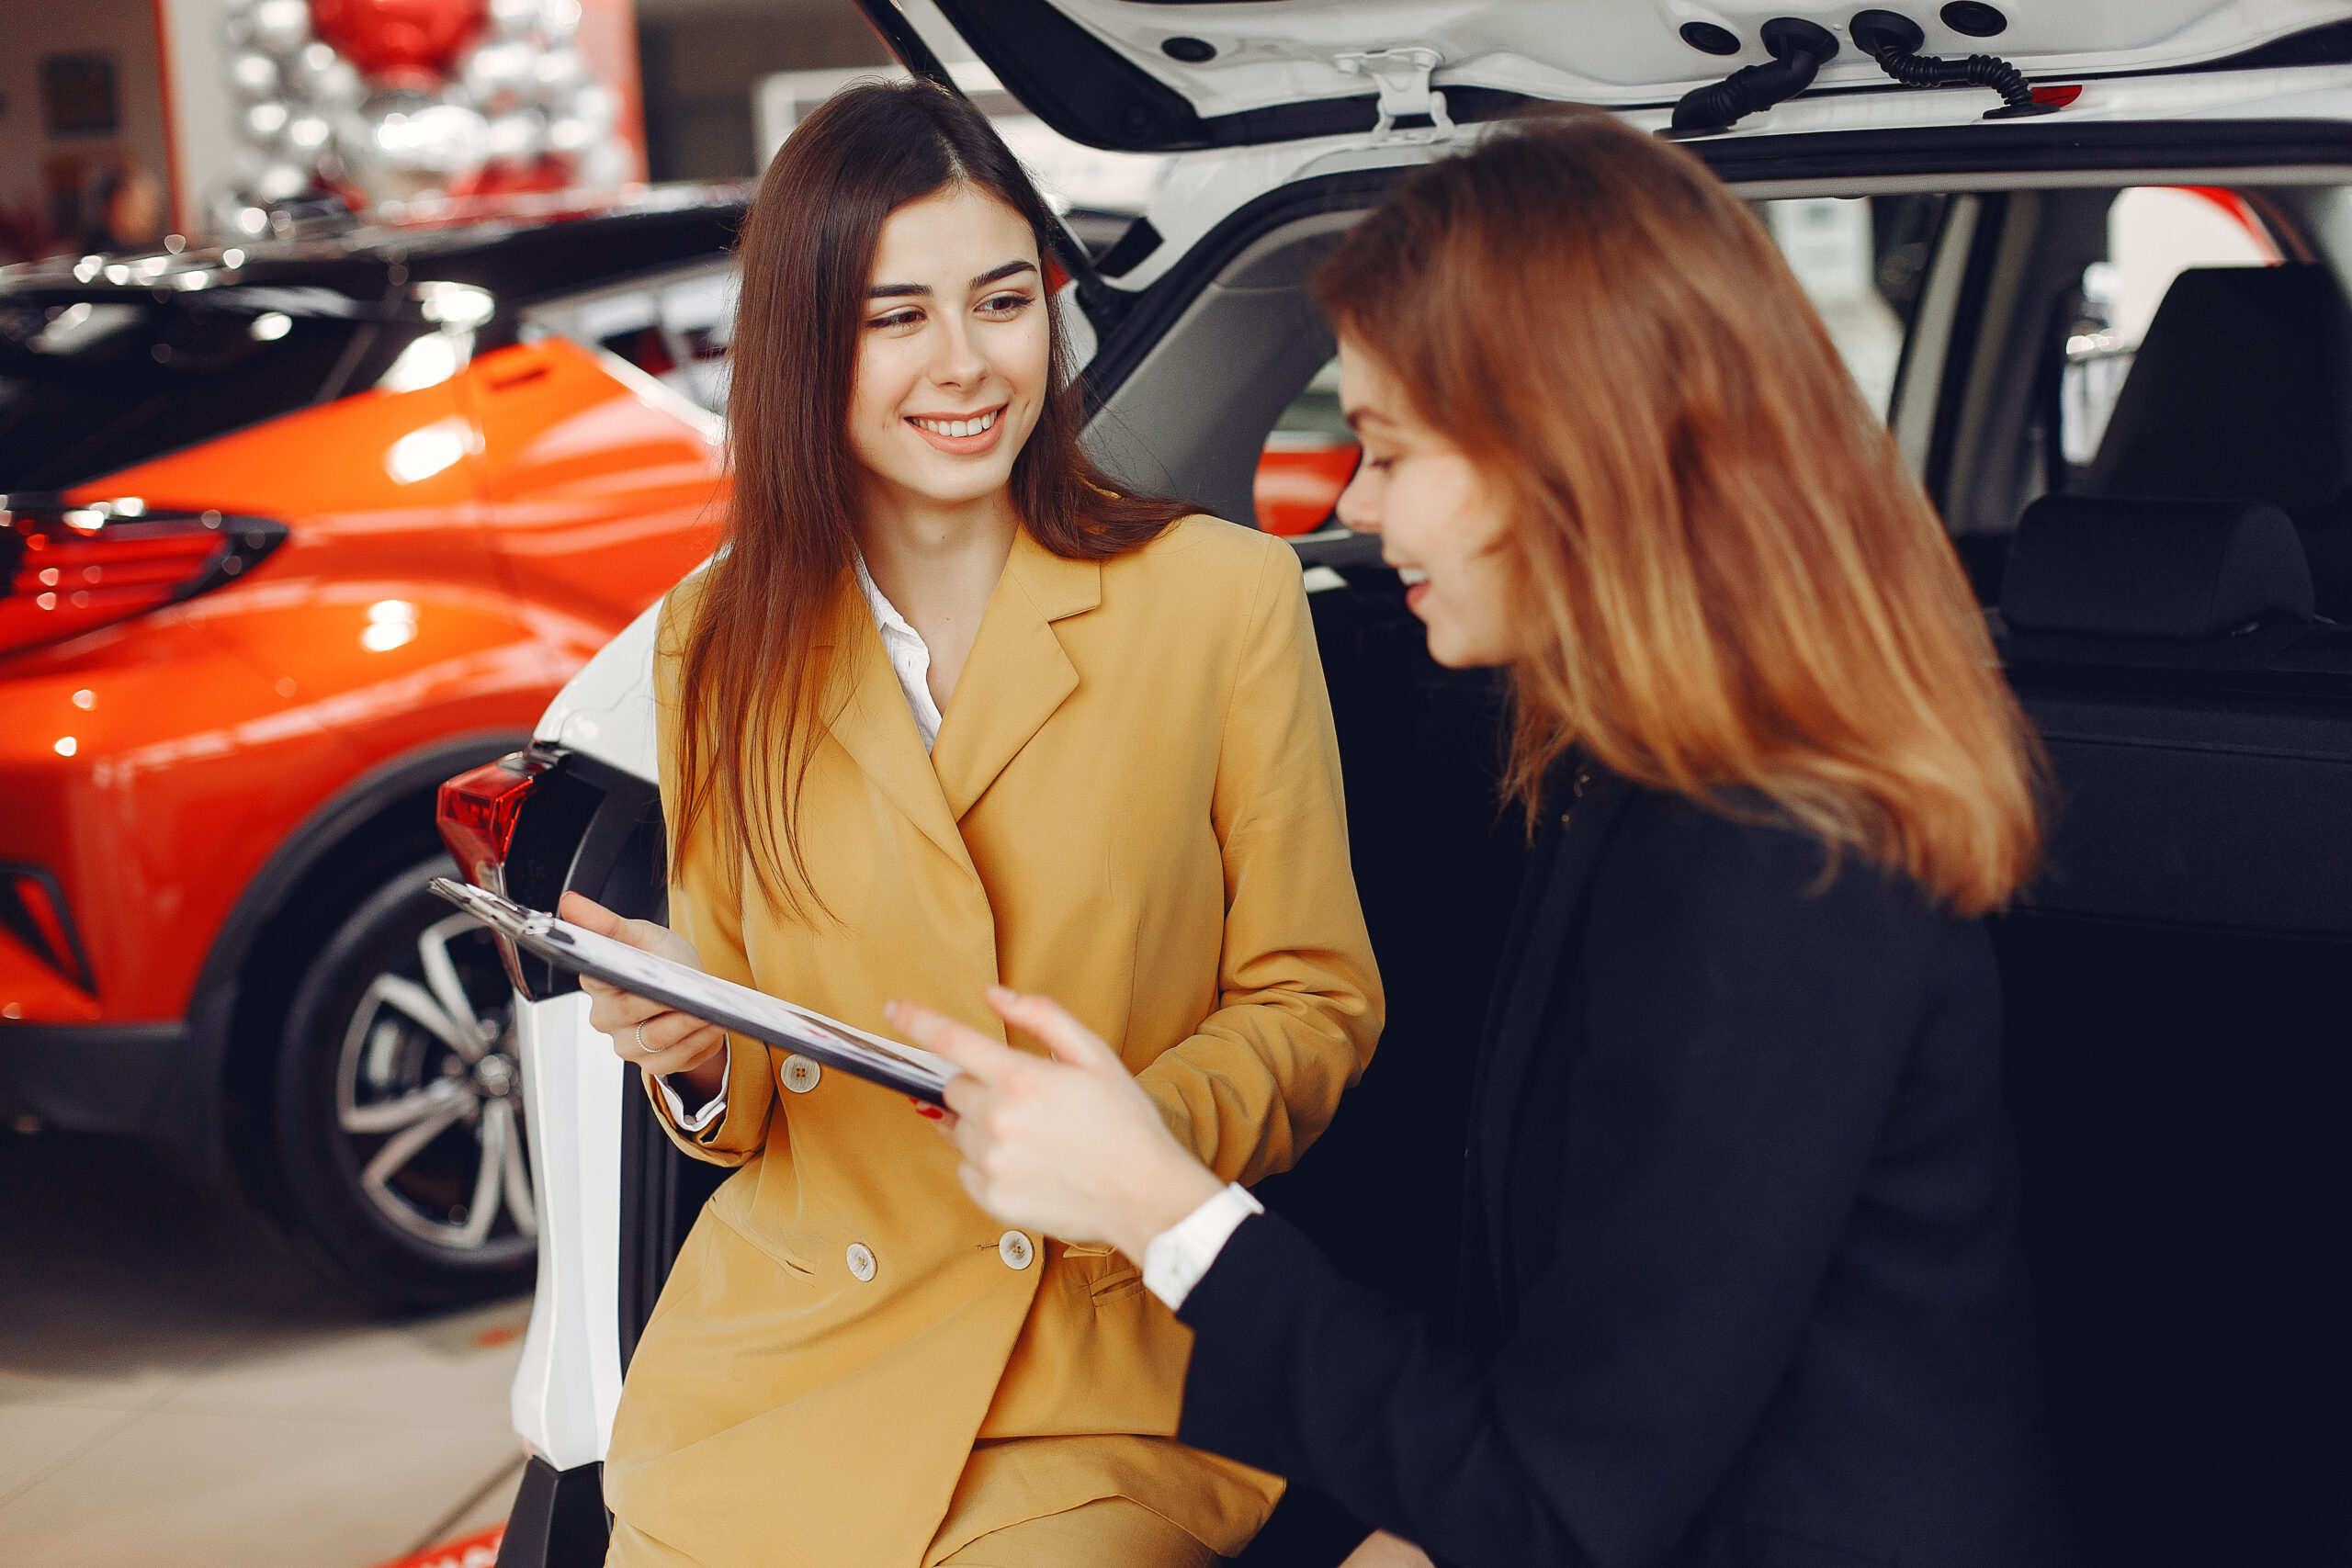 How do car dealerships attract more customers?